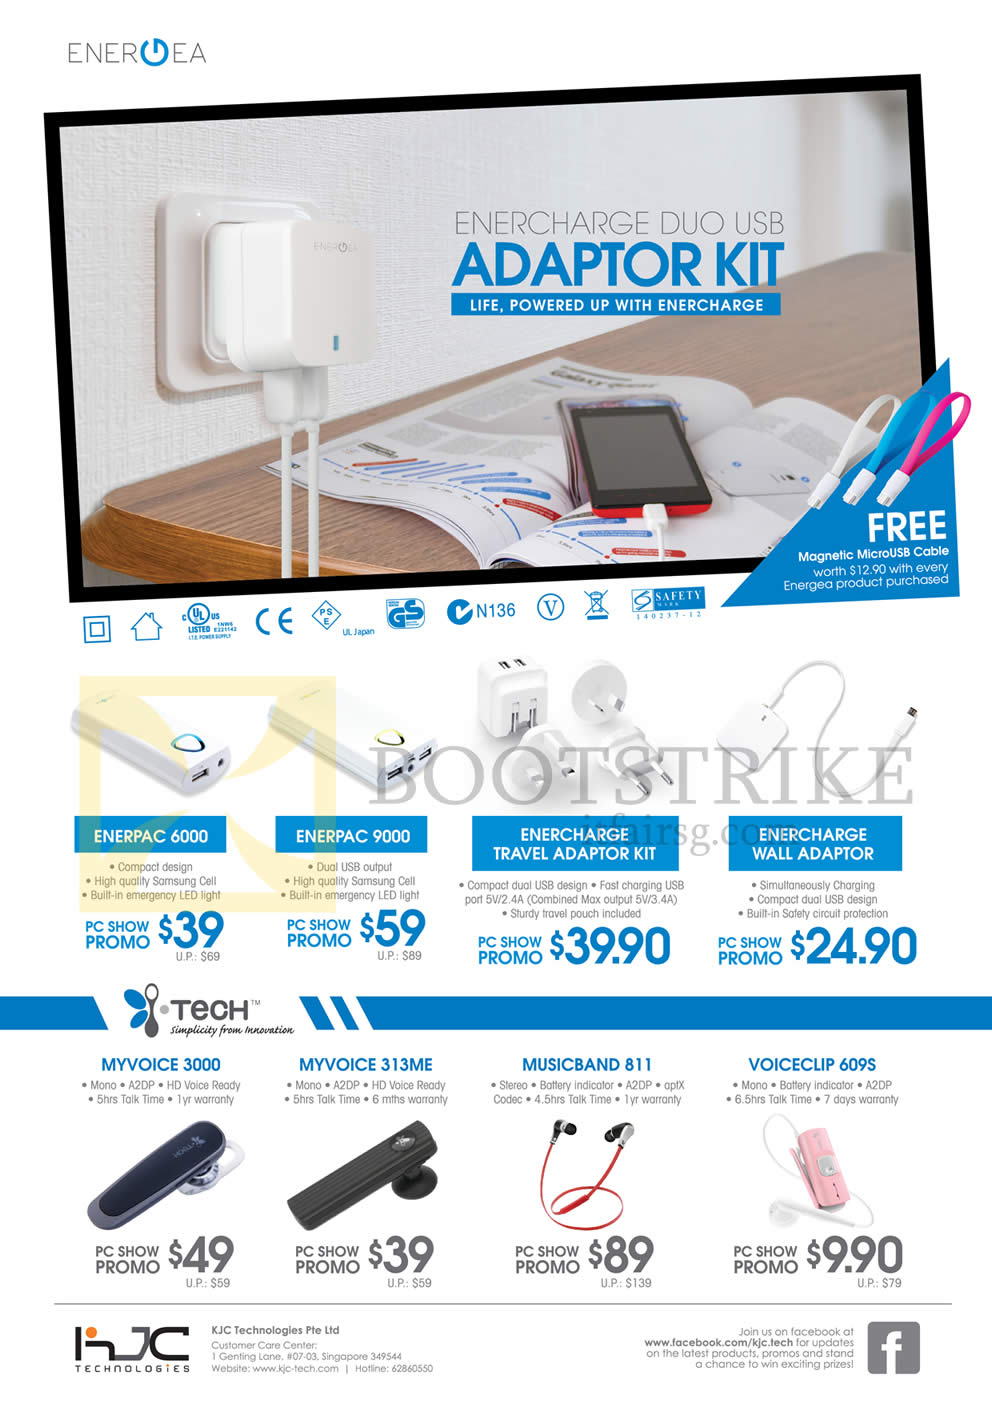 PC SHOW 2014 price list image brochure of KJC Energea Powerbanks Enercharge Duo USB Adapter Kit, Enerpac, I-Tech MyVoice Bluetooth Headsets 3000 313ME Musicband 811 Voiceclip 609S